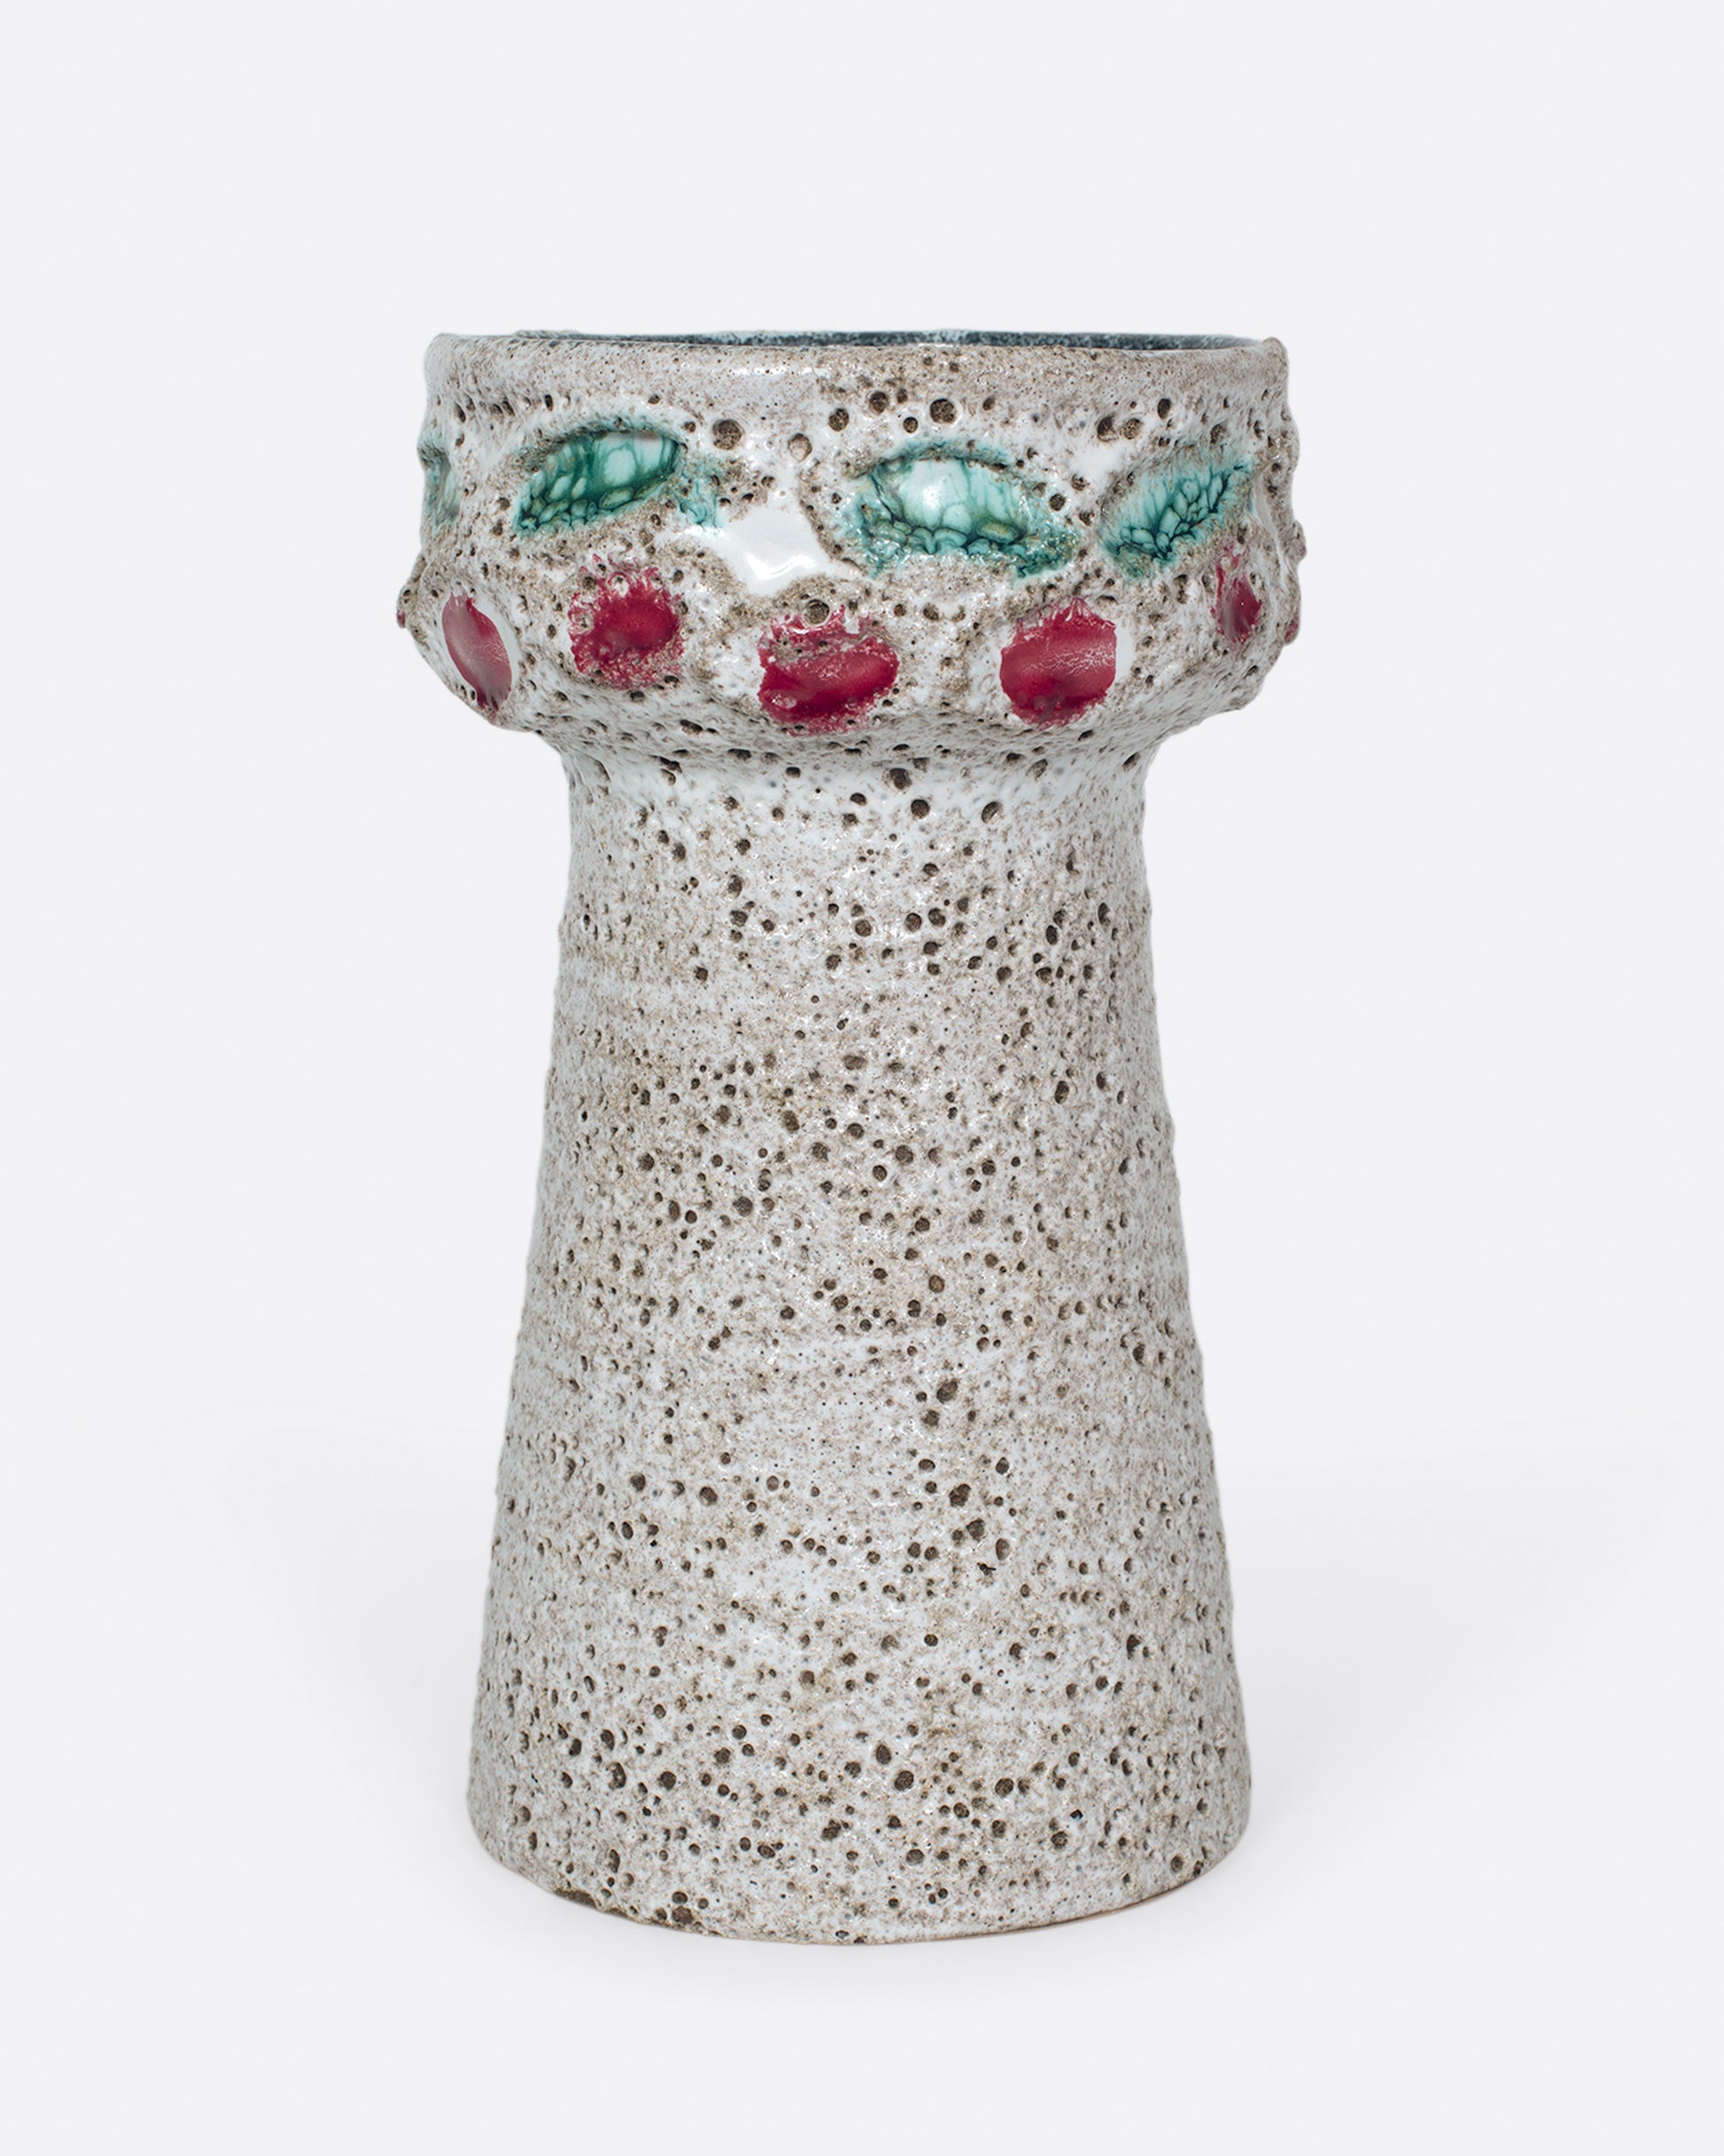 A mid-century German vase with a wide mouth and bubbly texture.